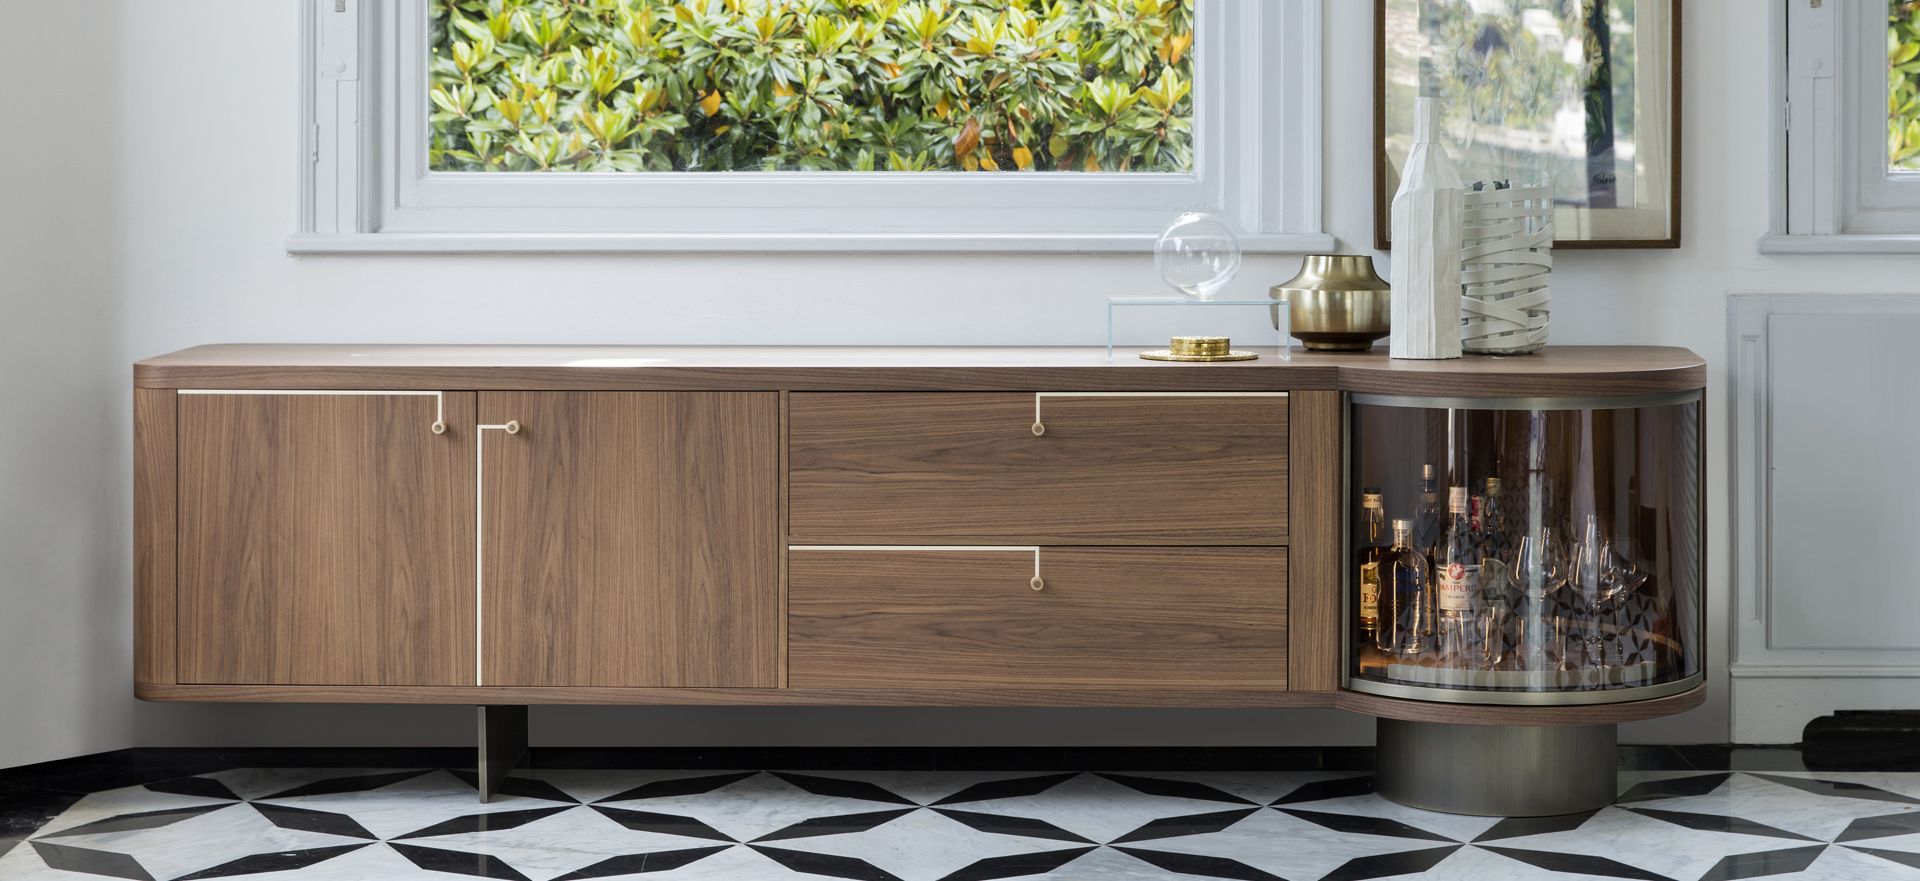 Sideboards & Cupboards | Contemporary Dining Furniture | London With Regard To Modern And Contemporary Sideboards (View 7 of 15)